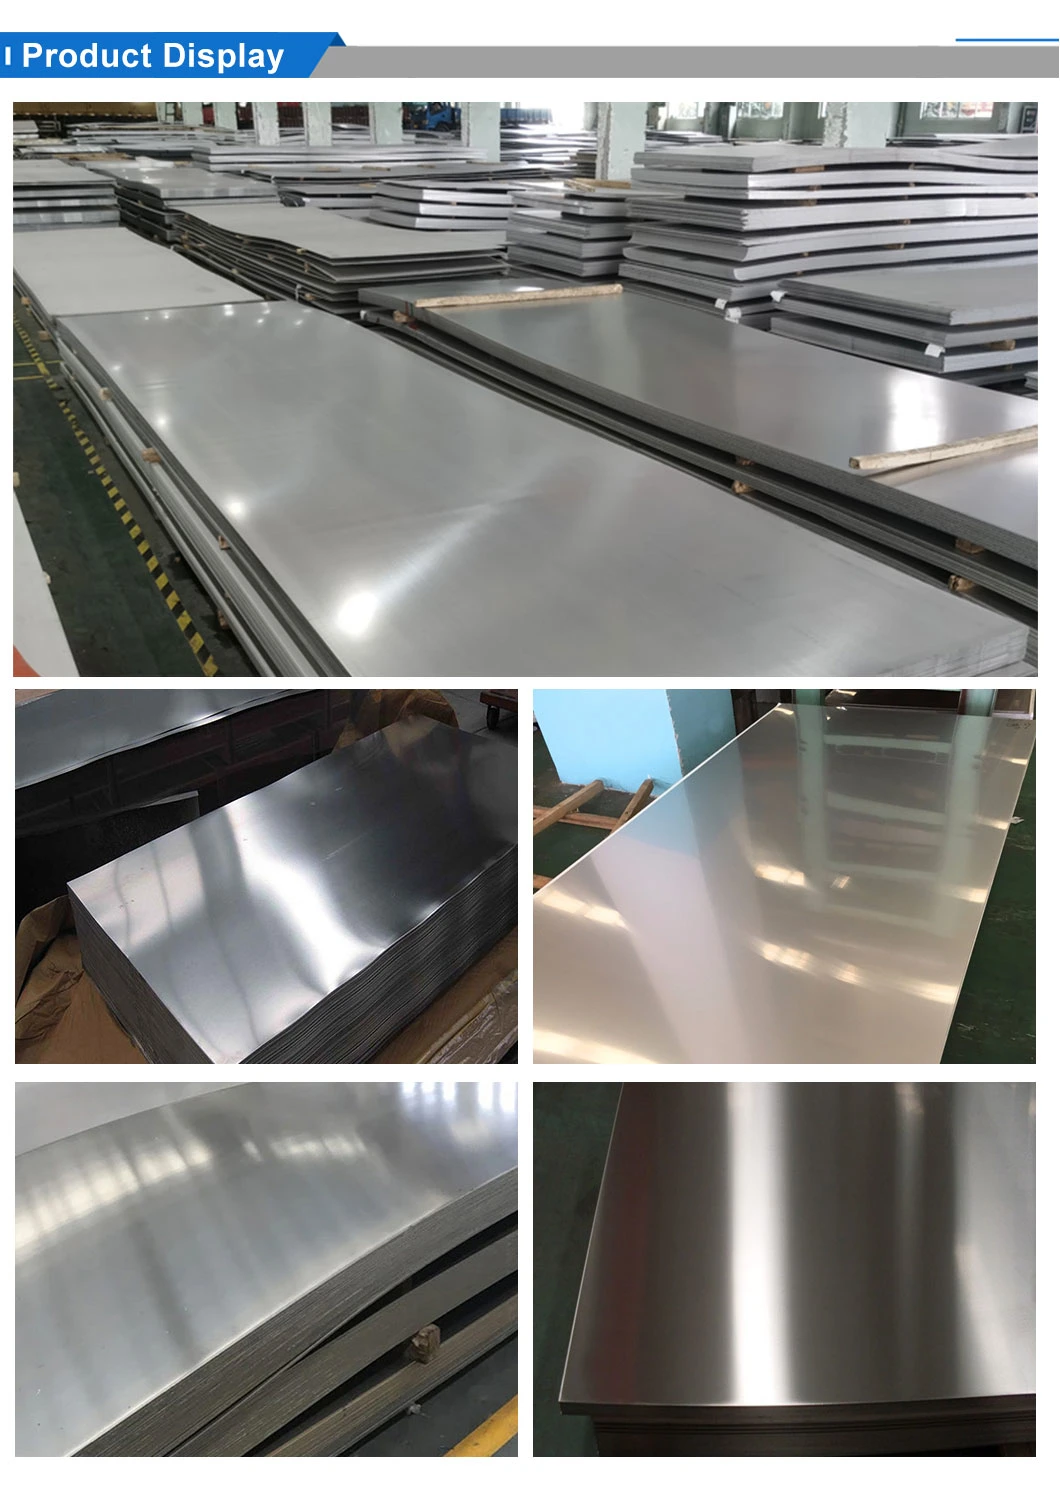 AISI Steel Nickel Alloy Sheet/Plate Inconel 600 601 625 Incoloy800h